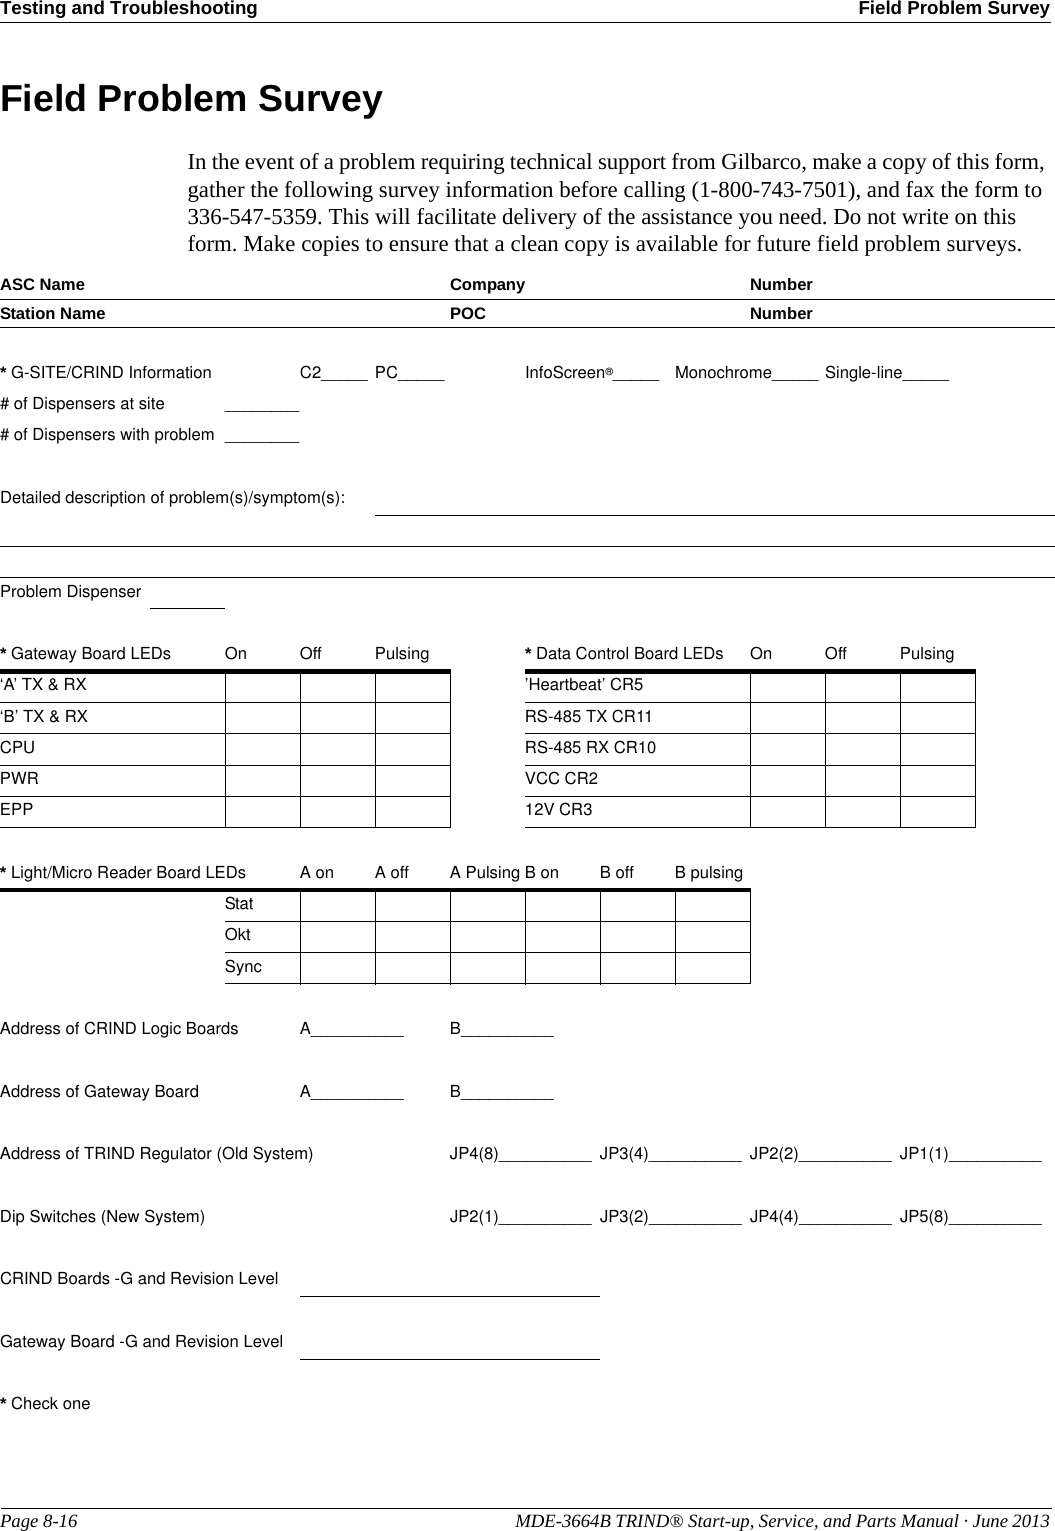 Testing and Troubleshooting Field Problem SurveyPage 8-16                                                                                                  MDE-3664B TRIND® Start-up, Service, and Parts Manual · June 2013Field Problem SurveyIn the event of a problem requiring technical support from Gilbarco, make a copy of this form, gather the following survey information before calling (1-800-743-7501), and fax the form to 336-547-5359. This will facilitate delivery of the assistance you need. Do not write on this form. Make copies to ensure that a clean copy is available for future field problem surveys.ASC Name Company NumberStation Name  POC Number* G-SITE/CRIND Information C2_____PC_____ InfoScreen®_____ Monochrome_____ Single-line_____# of Dispensers at site ________# of Dispensers with problem ________Detailed description of problem(s)/symptom(s):Problem Dispenser* Gateway Board LEDs On Off  Pulsing * Data Control Board LEDs On Off Pulsing‘A’ TX &amp; RX ’Heartbeat’ CR5‘B’ TX &amp; RX RS-485 TX CR11CPU RS-485 RX CR10PWR VCC CR2EPP 12V CR3* Light/Micro Reader Board LEDs A on A offA Pulsing B on B off B pulsingStatOktSyncAddress of CRIND Logic Boards A__________ B__________Address of Gateway Board A__________ B__________Address of TRIND Regulator (Old System) JP4(8)__________ JP3(4)__________ JP2(2)__________ JP1(1)__________Dip Switches (New System) JP2(1)__________ JP3(2)__________ JP4(4)__________ JP5(8)__________CRIND Boards -G and Revision LevelGateway Board -G and Revision Level* Check one